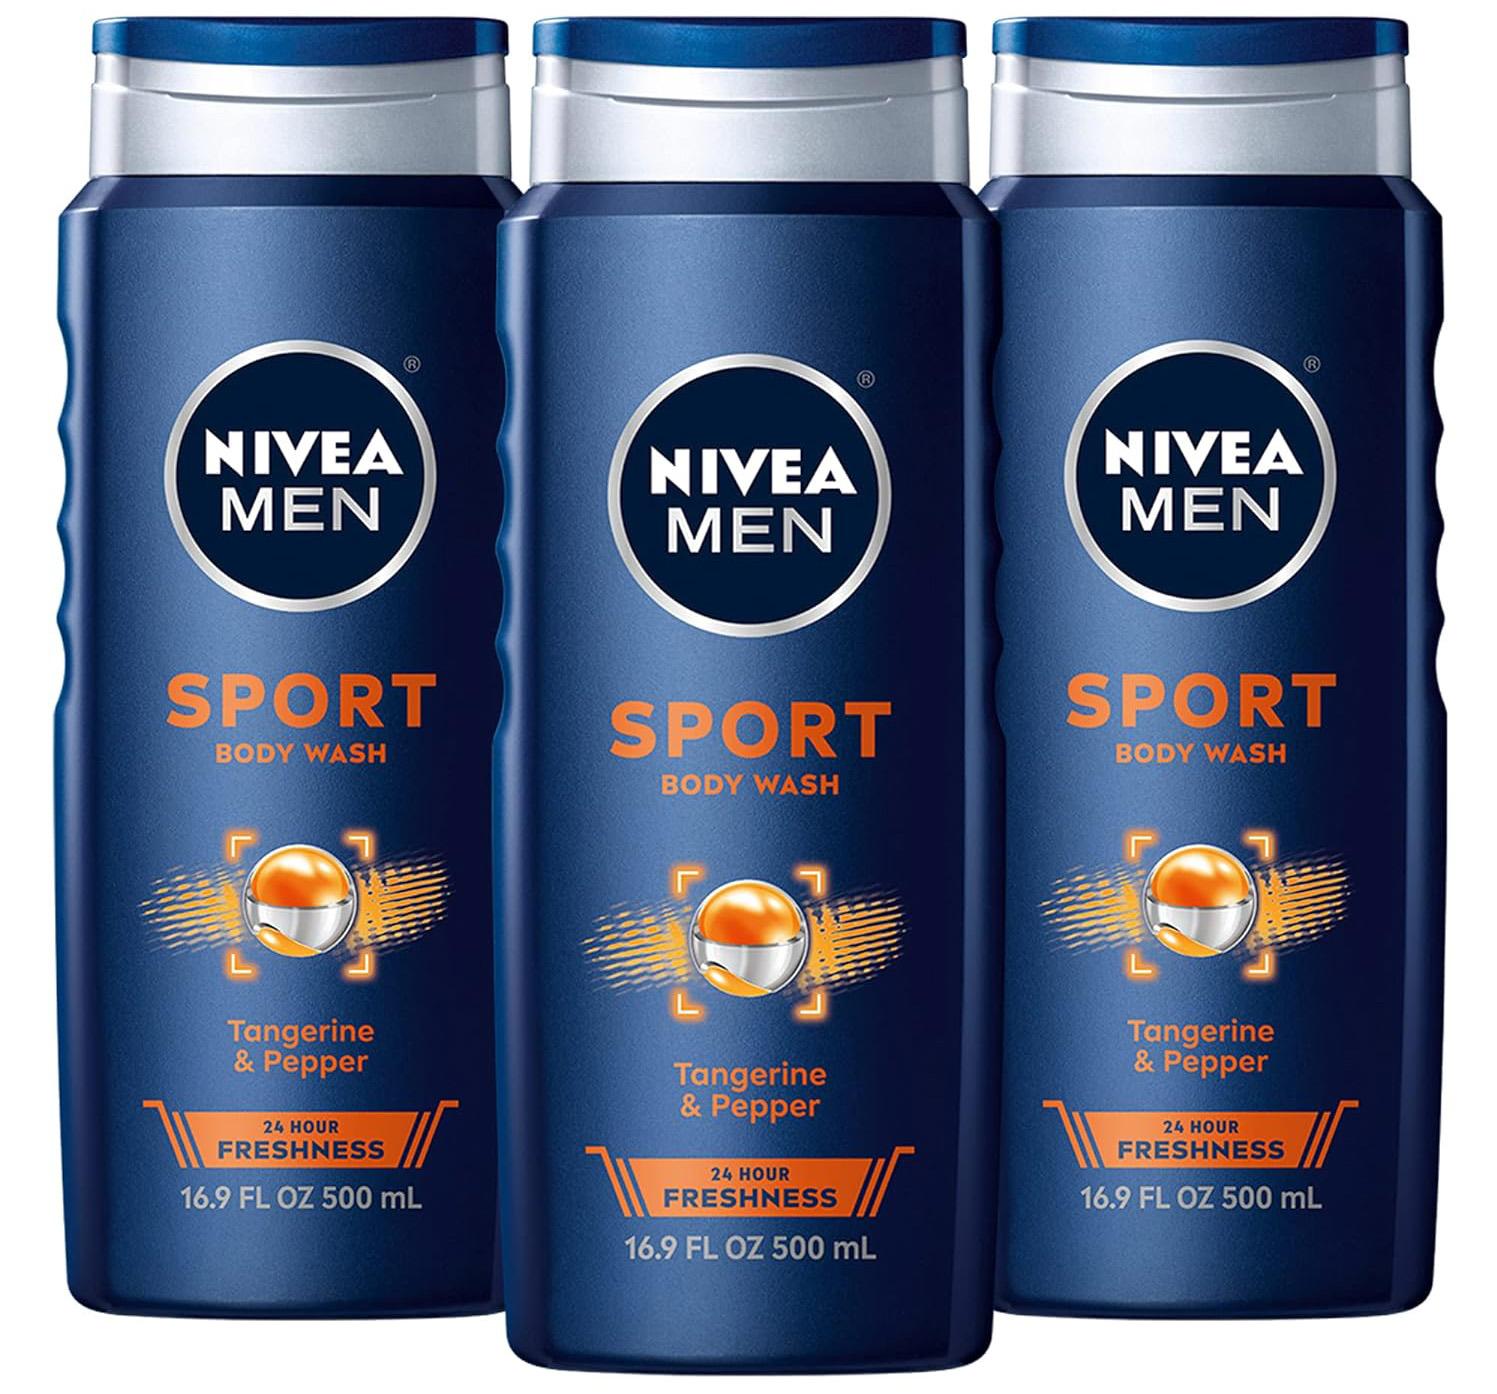 Nivea Men Sport Body Washes Tangerine and Pepper 3 Pack for $10.33 Shipped